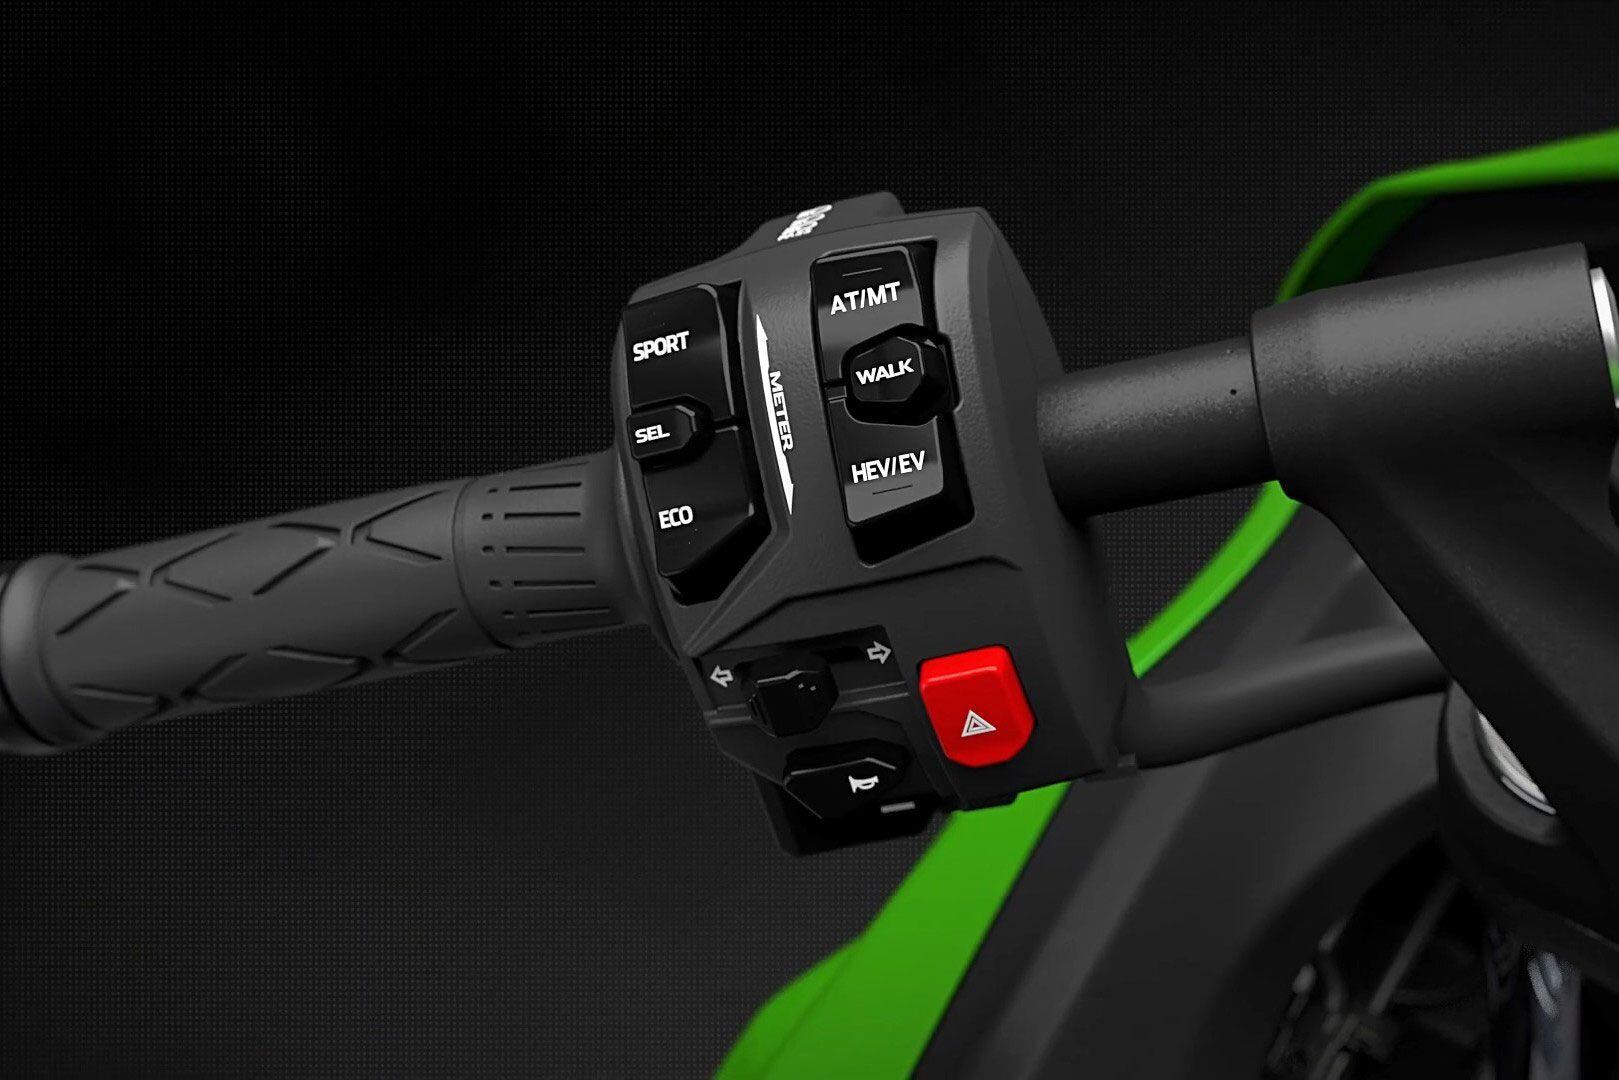 On the left handlebar, riders will be able to select multiple drive modes.